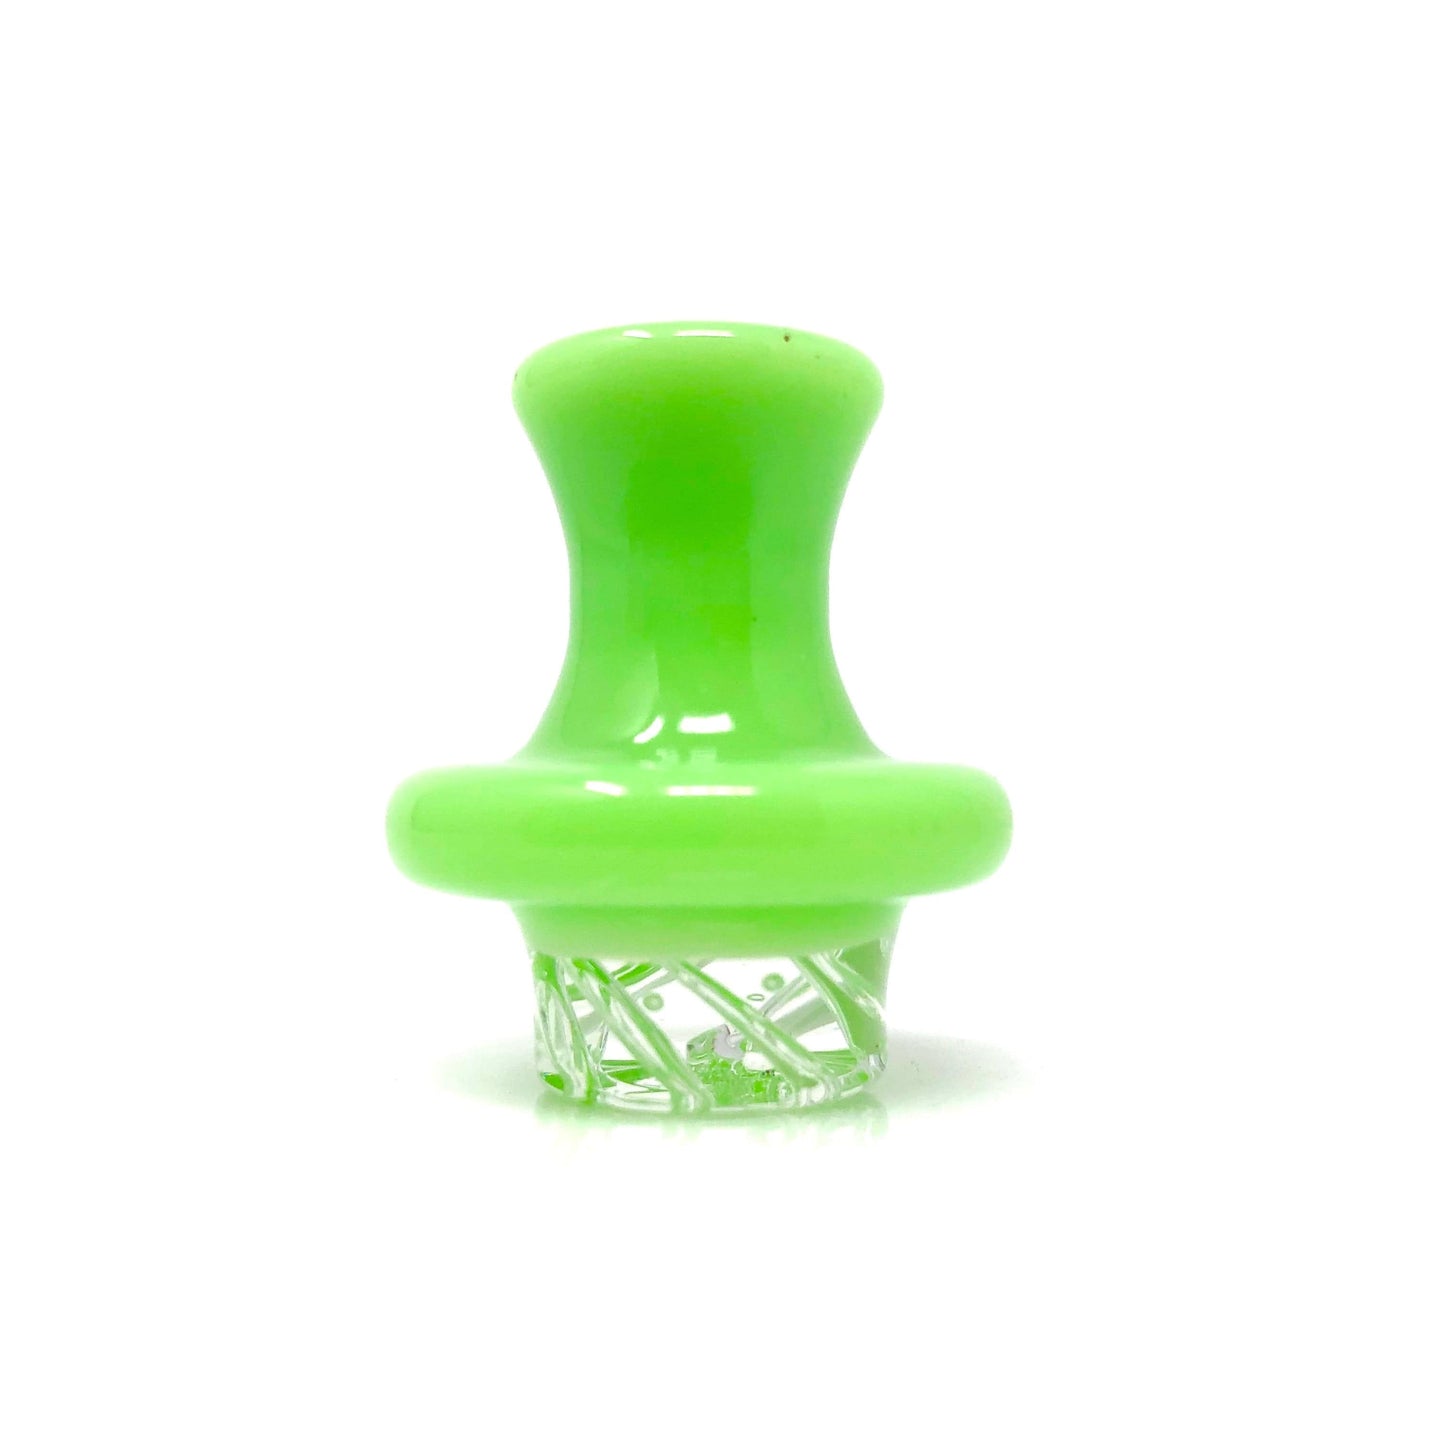 AFM Smoke Carb Cap Slime Color Turbo Spinner Glass Carb Cap + 2 Pearls